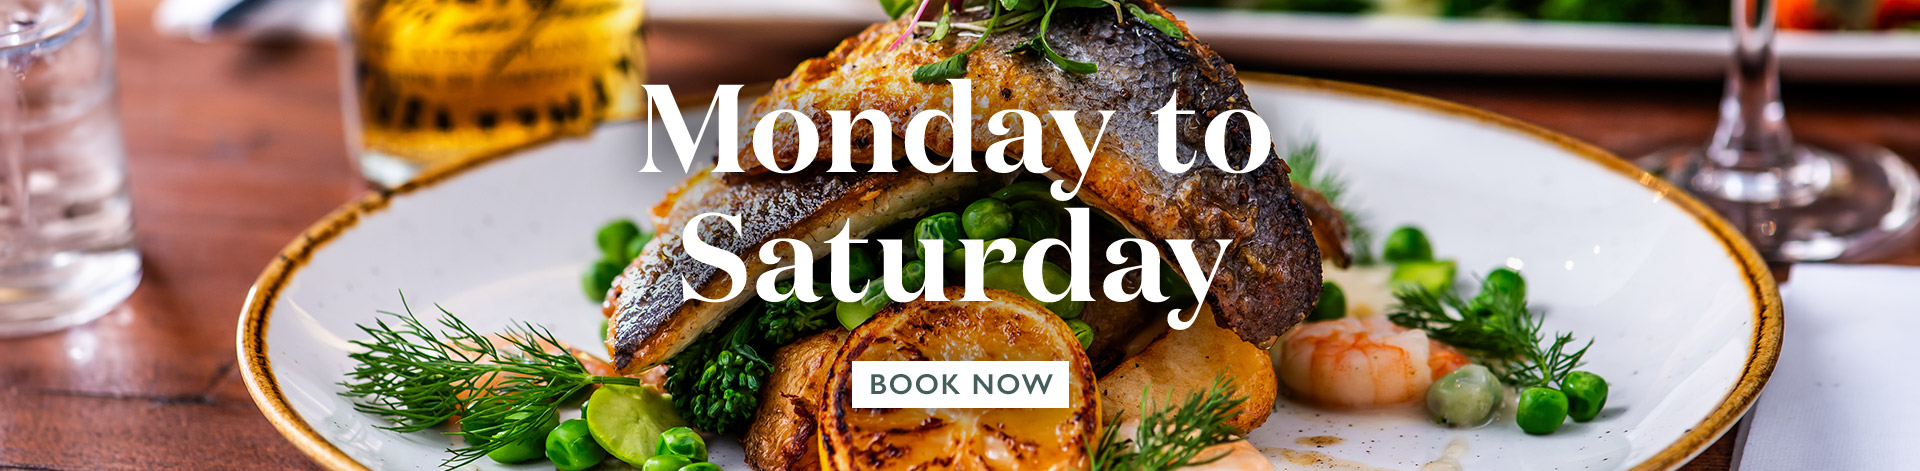 Book now at The Three Horseshoes